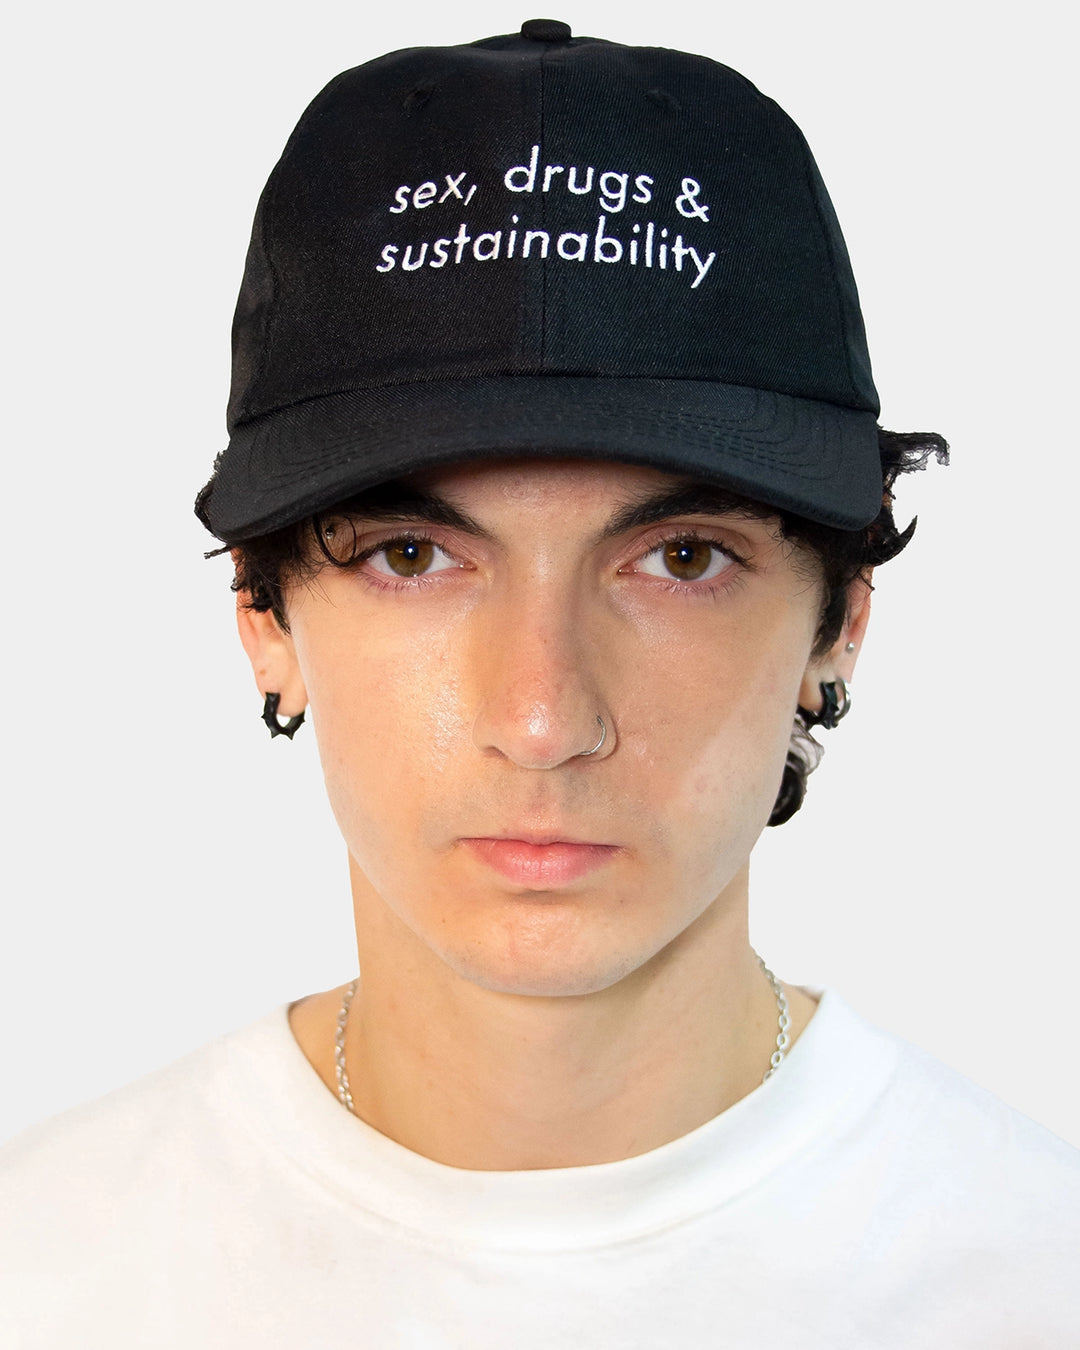 SEX, DRUGS & SUSTAINABILITY RECYCLED CAP BLACK